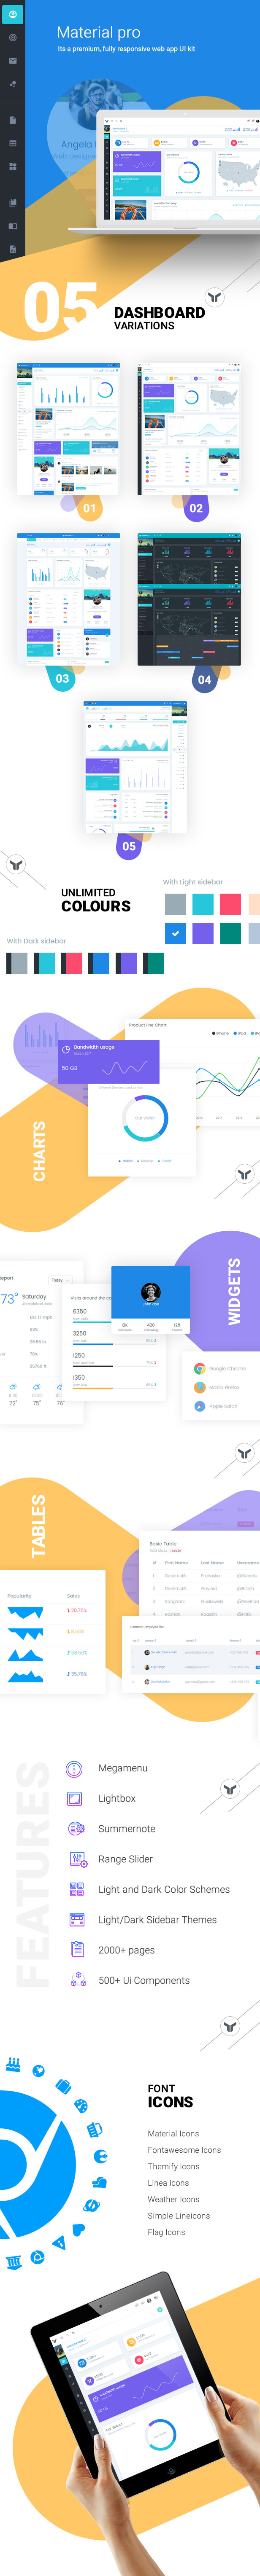 material pro features2 - MaterialPro - Material Design Bootstrap 4 Admin Template